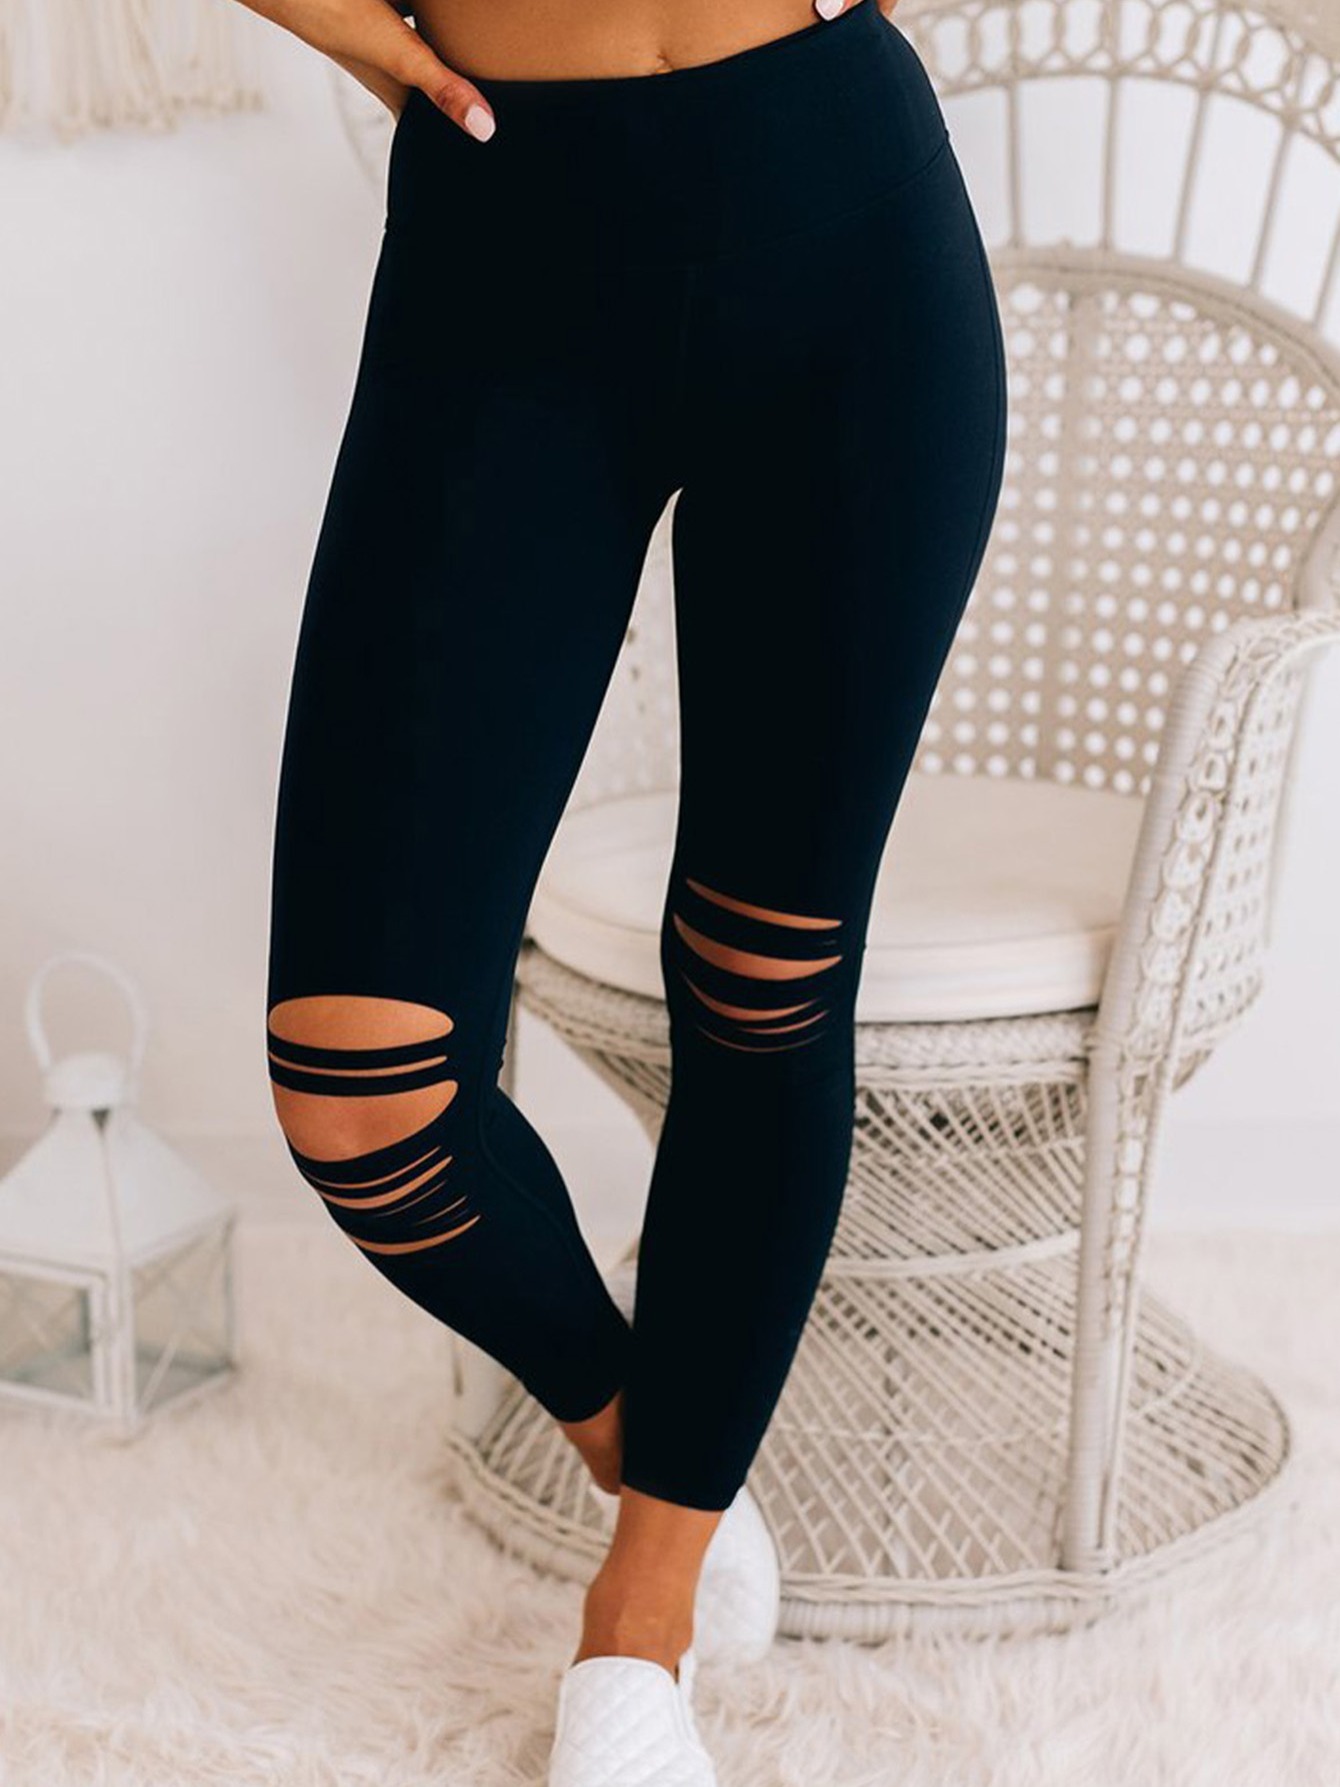 Sexy & Stylish Black High Waist Yoga Leggings With Pocket - Perfect Fit for  Women!